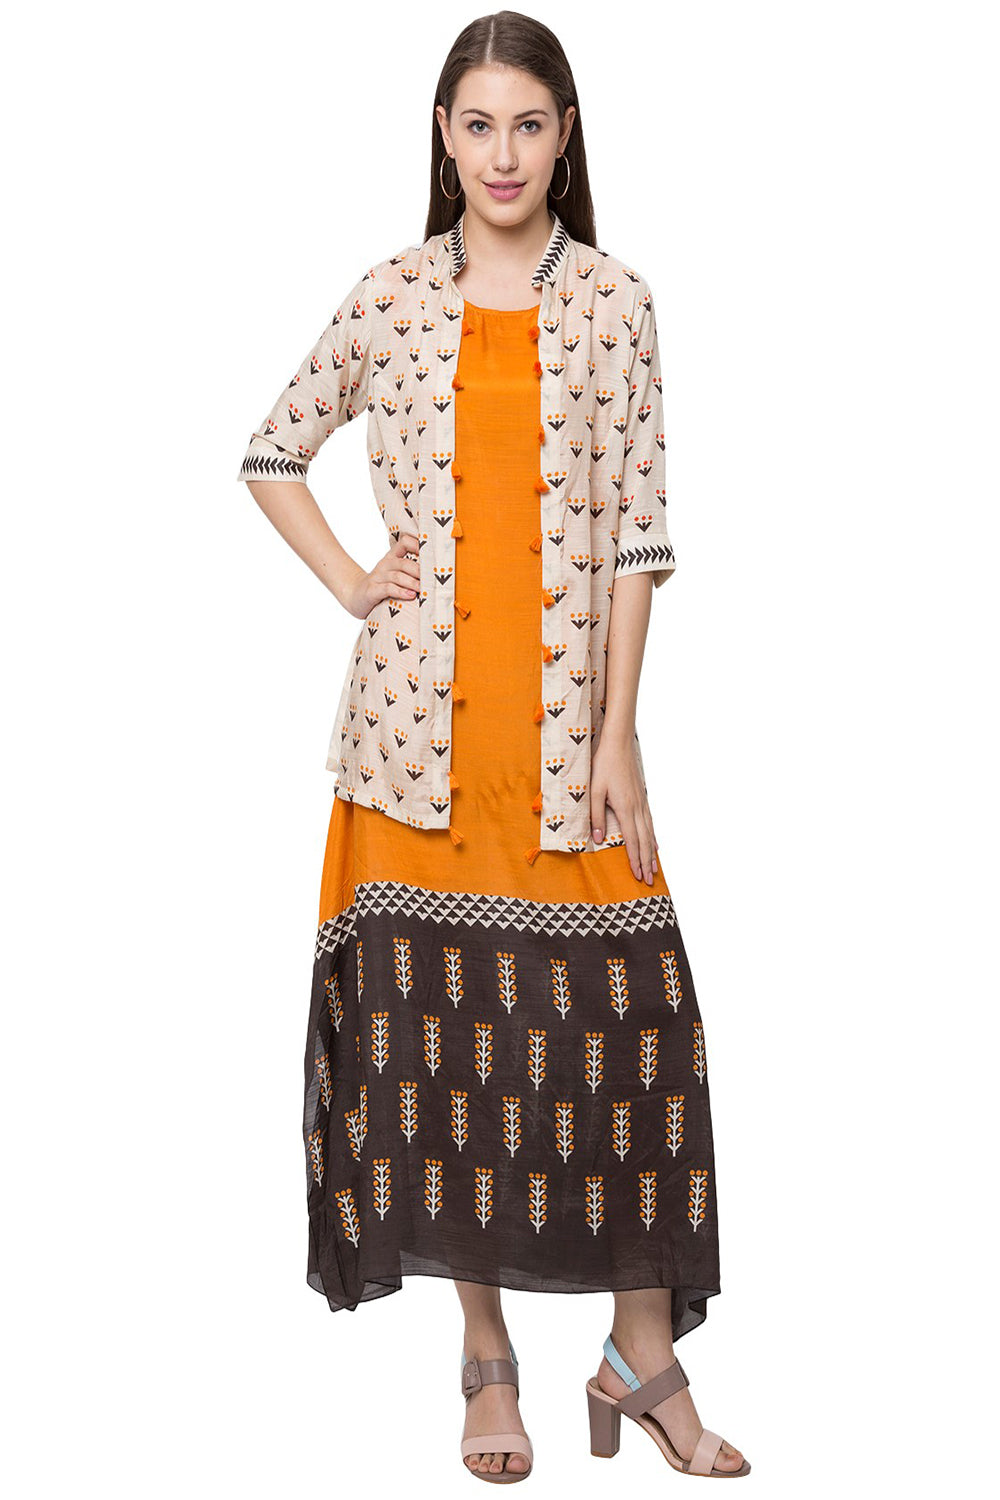 Asymmetrical Tree Printed Sleeveless Dress And Jacket With Tassel Detail